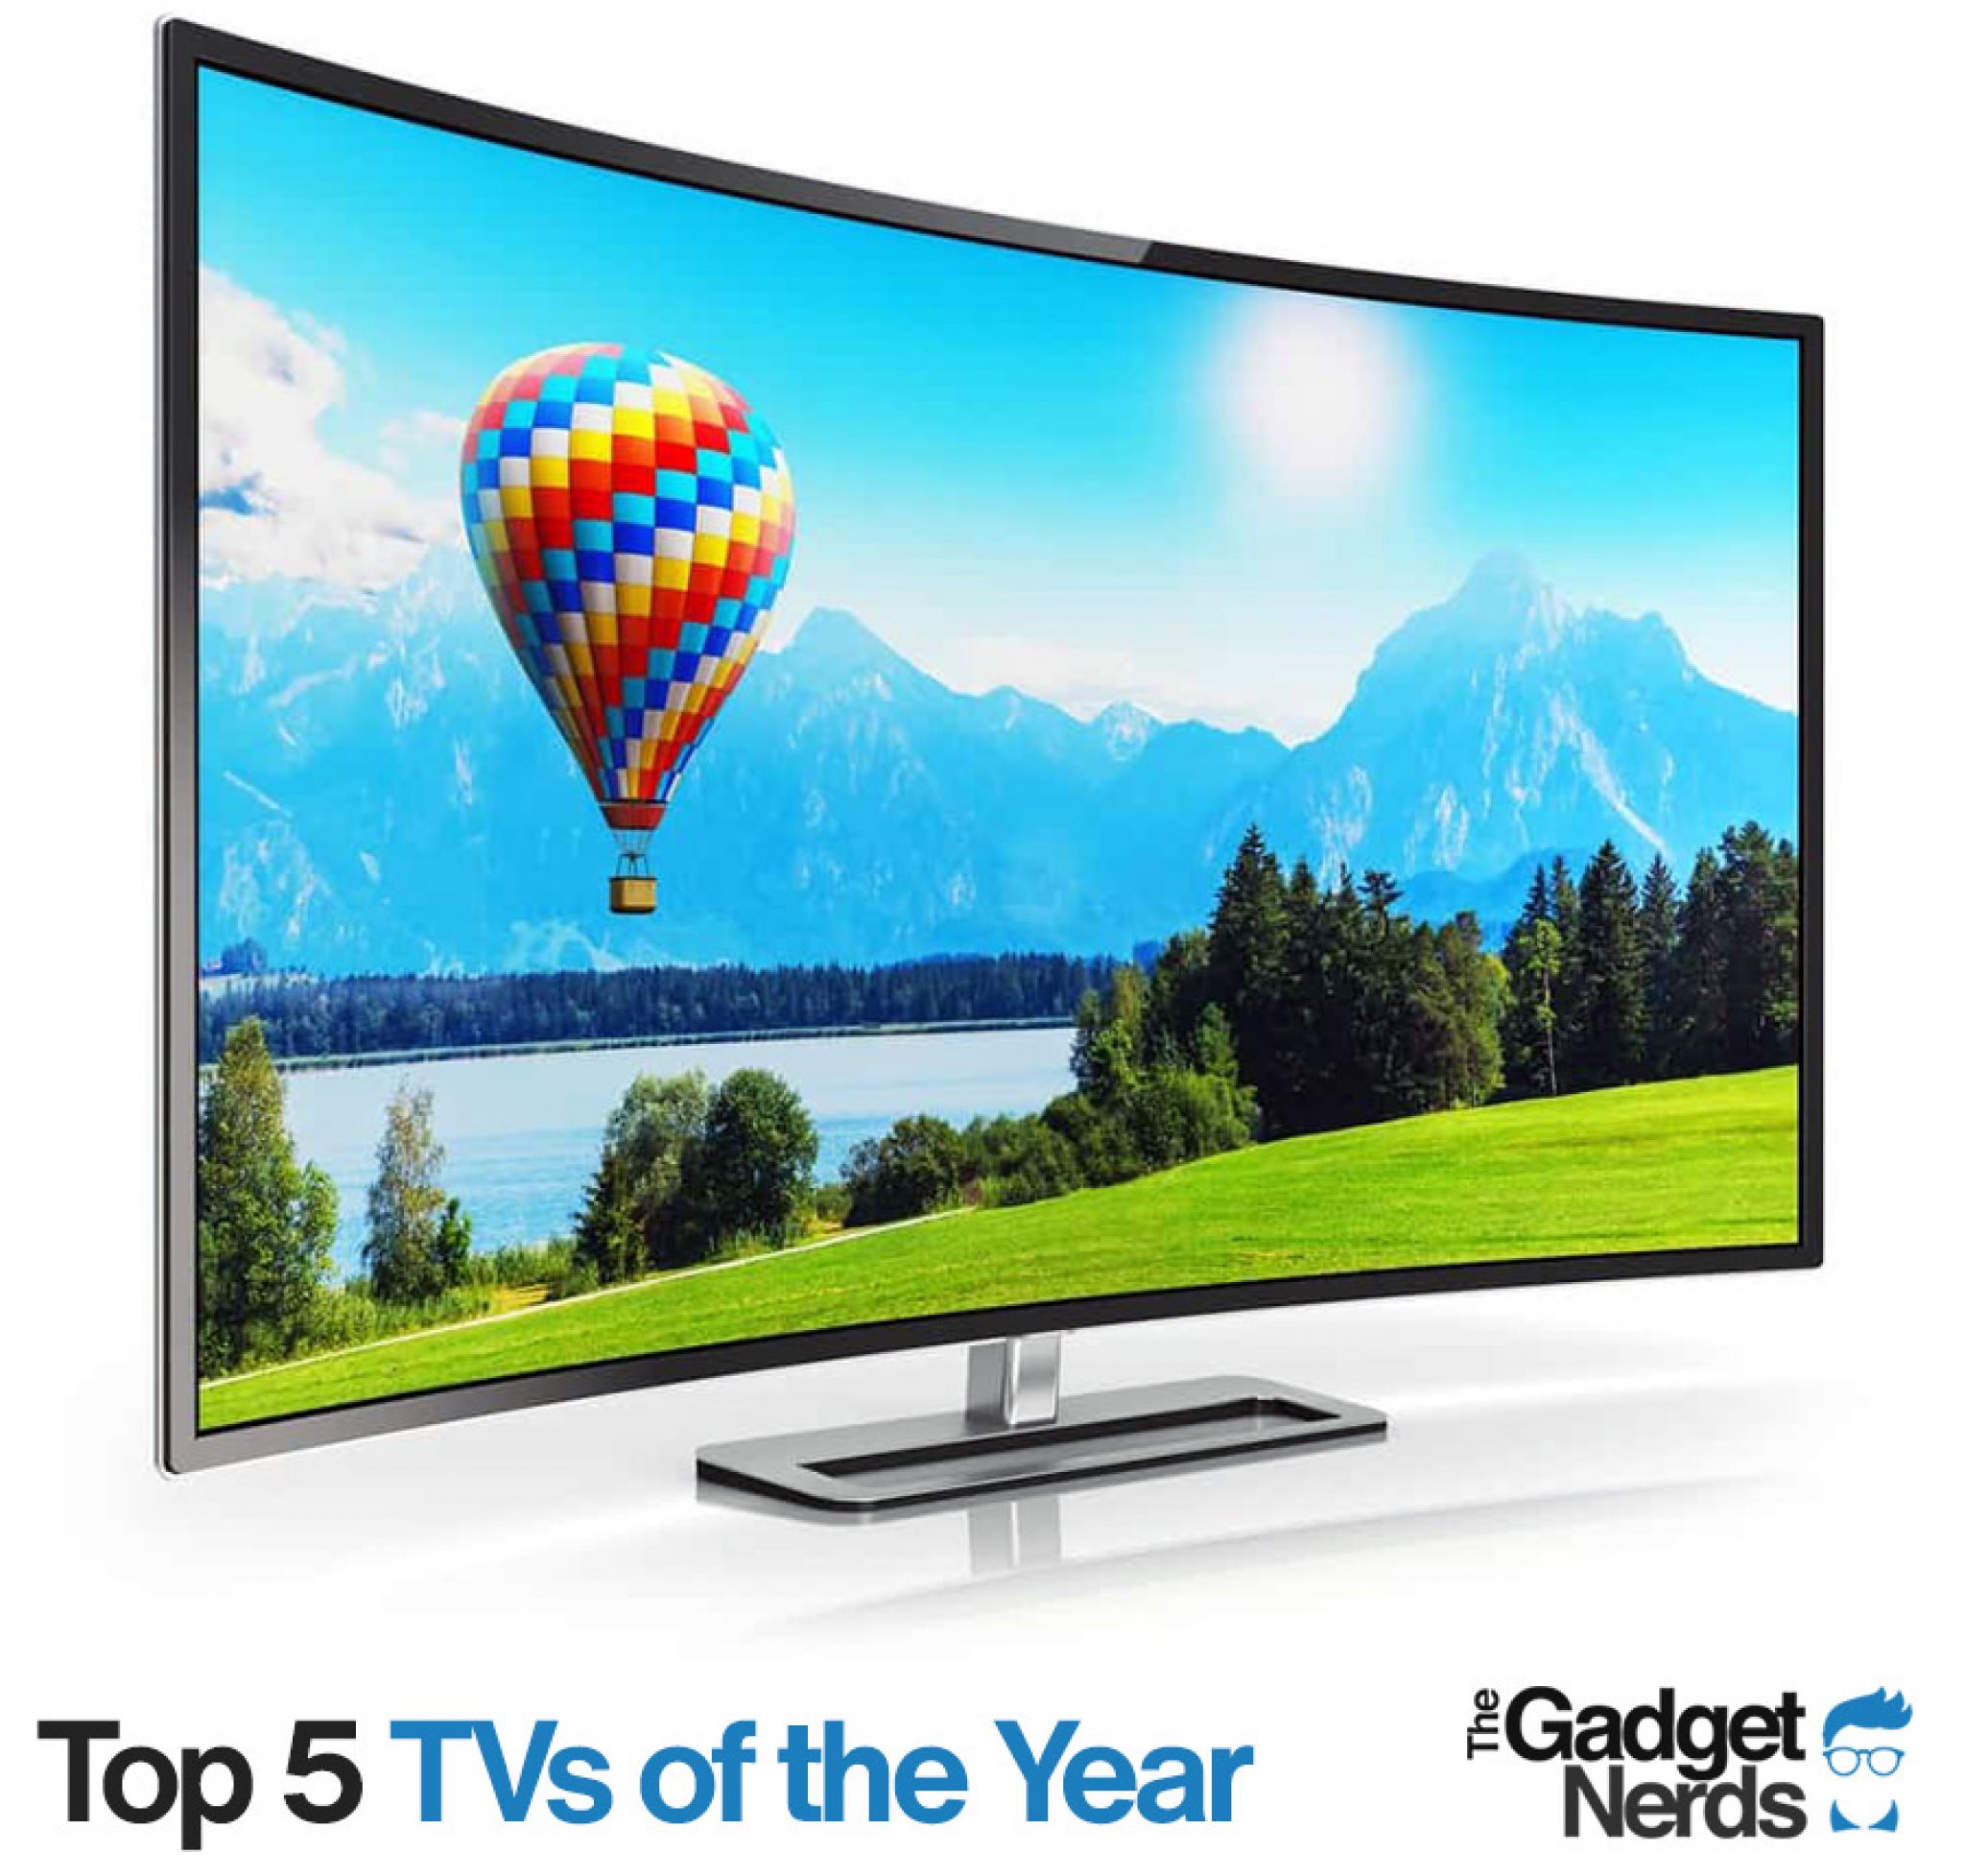 Compare the Top TVs of the Year We Reveal our Top 5